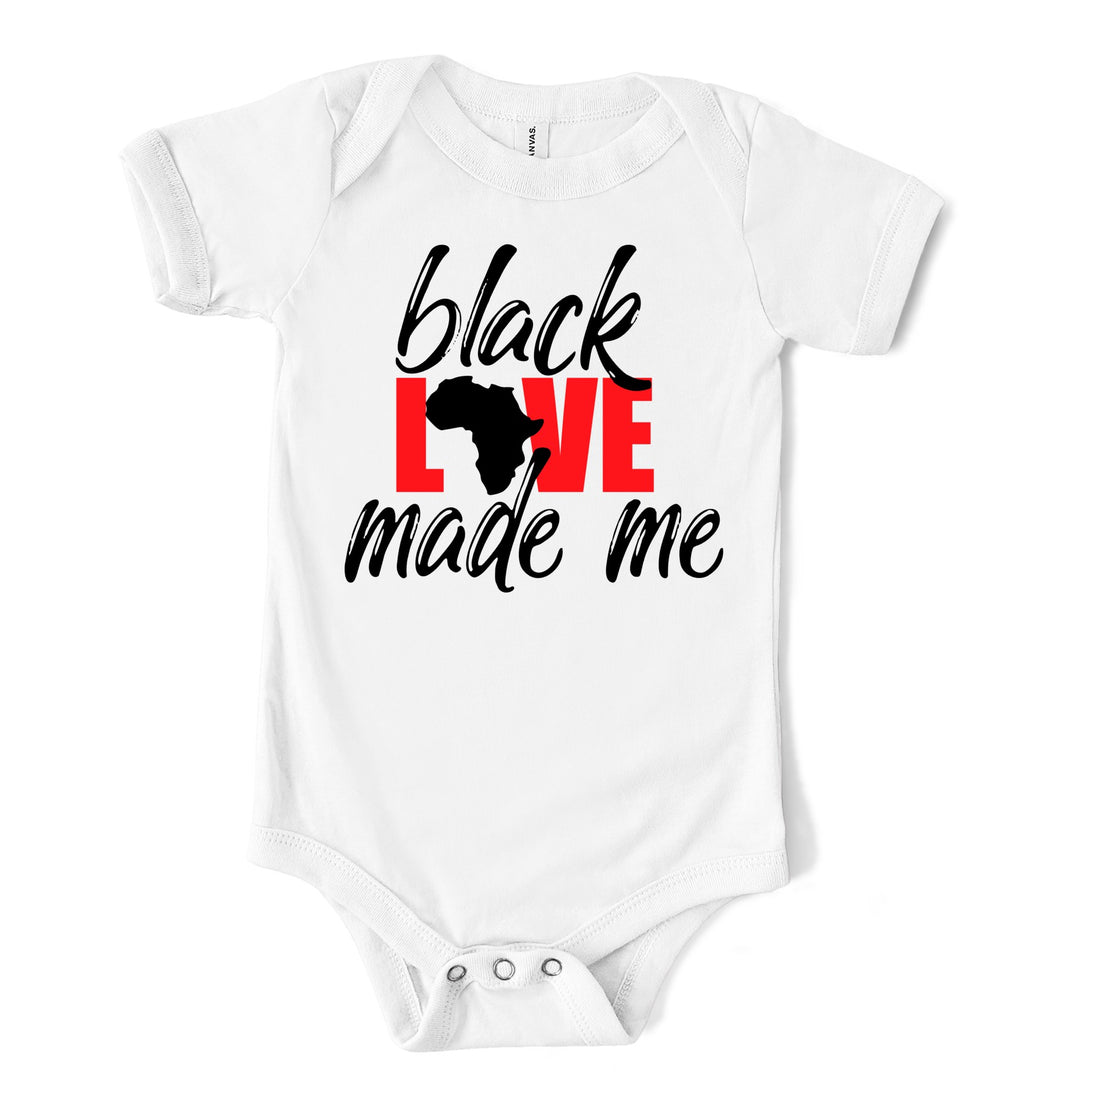 Profyle District - Black Love Made Me (Infant) - Youth T-Shirts - White